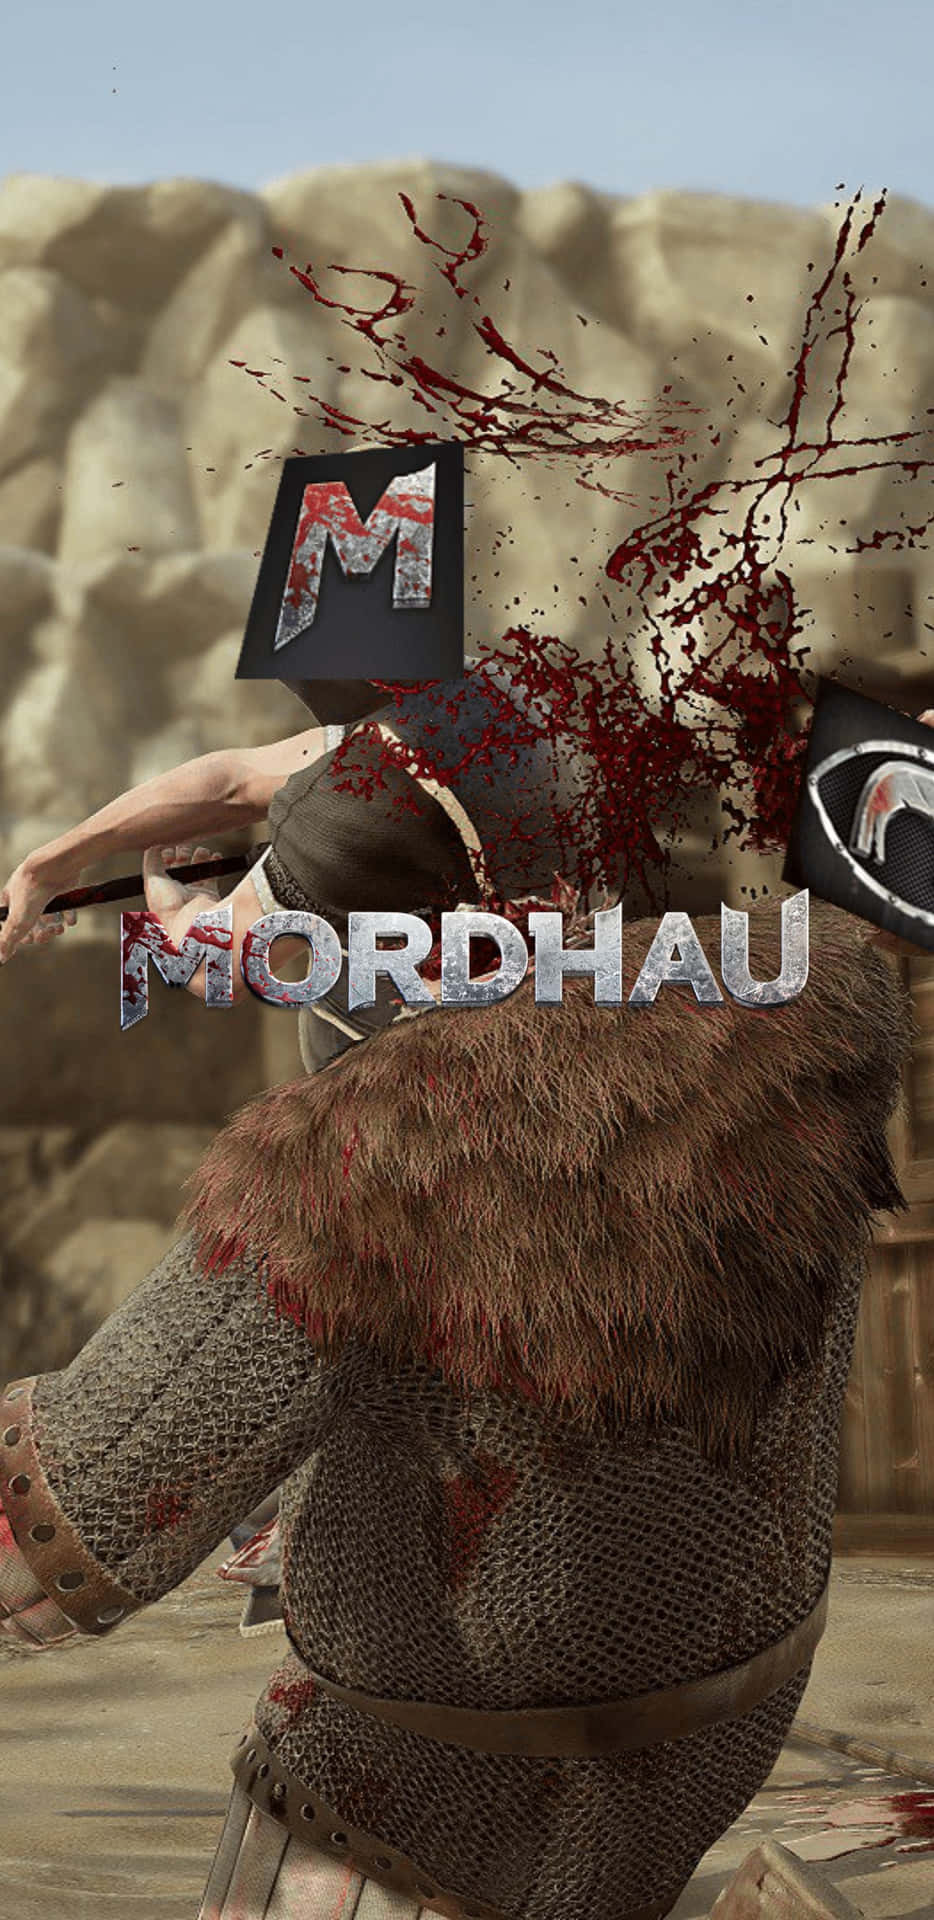 Experience Mordhau in High Definition with the Pixel 3XL